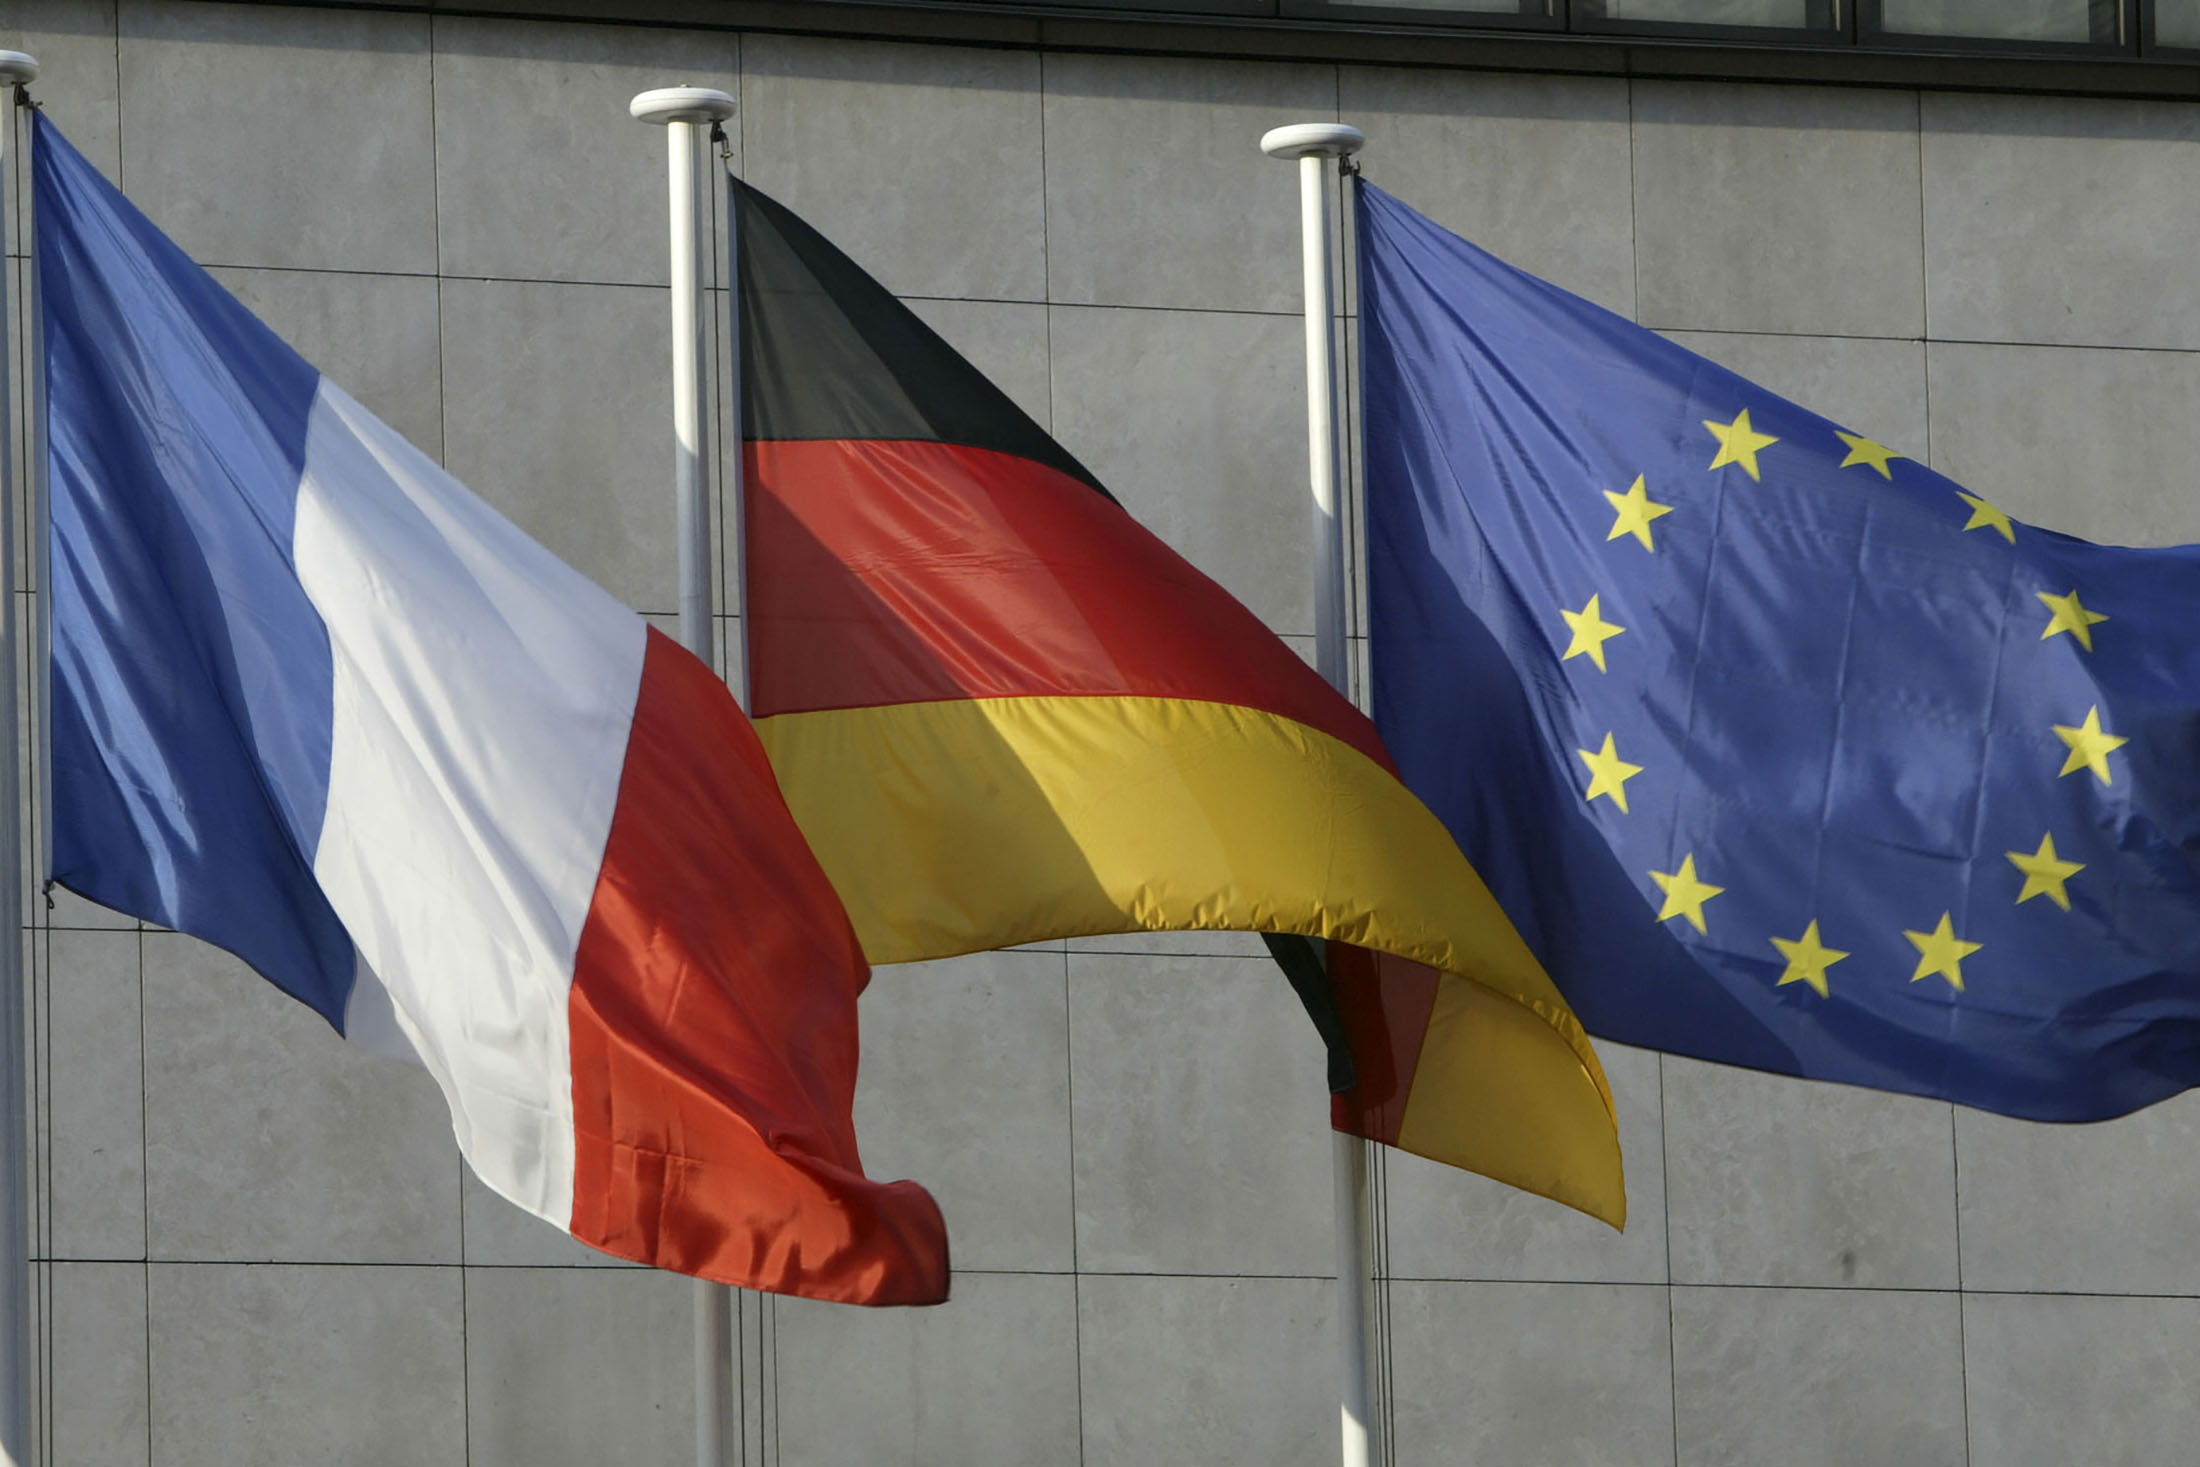 The French, left, German, and European flag, right, fly outside the French-German Economical and Financial Meeting in Paris, France, Monday, January 24, 2005.
